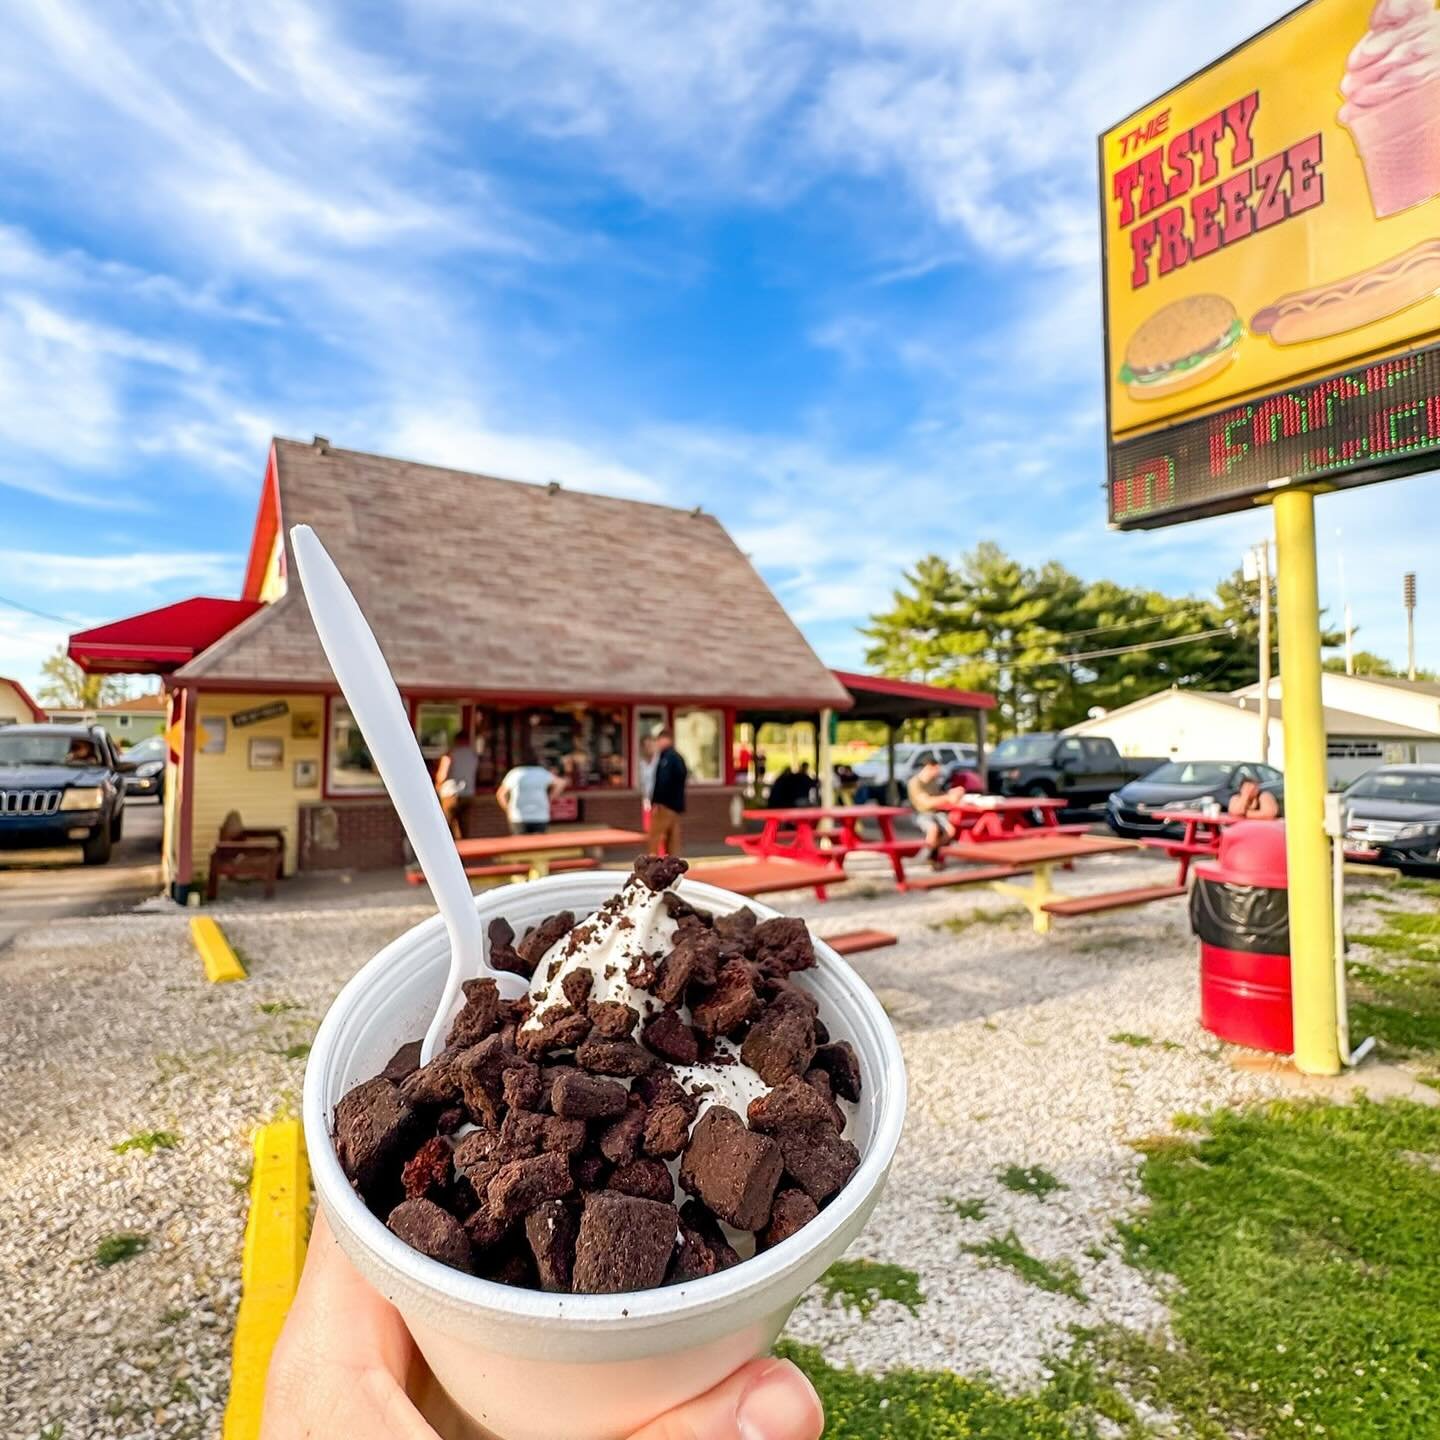 Welcome to The Tasty Freeze in Parke County Indiana! 🌭 Since 2001, The Tasty Freeze has been serving up the best ice cream, hot dogs, hamburgers, and more. Stop by for one of their famous loaded milkshakes! ☀️🍦